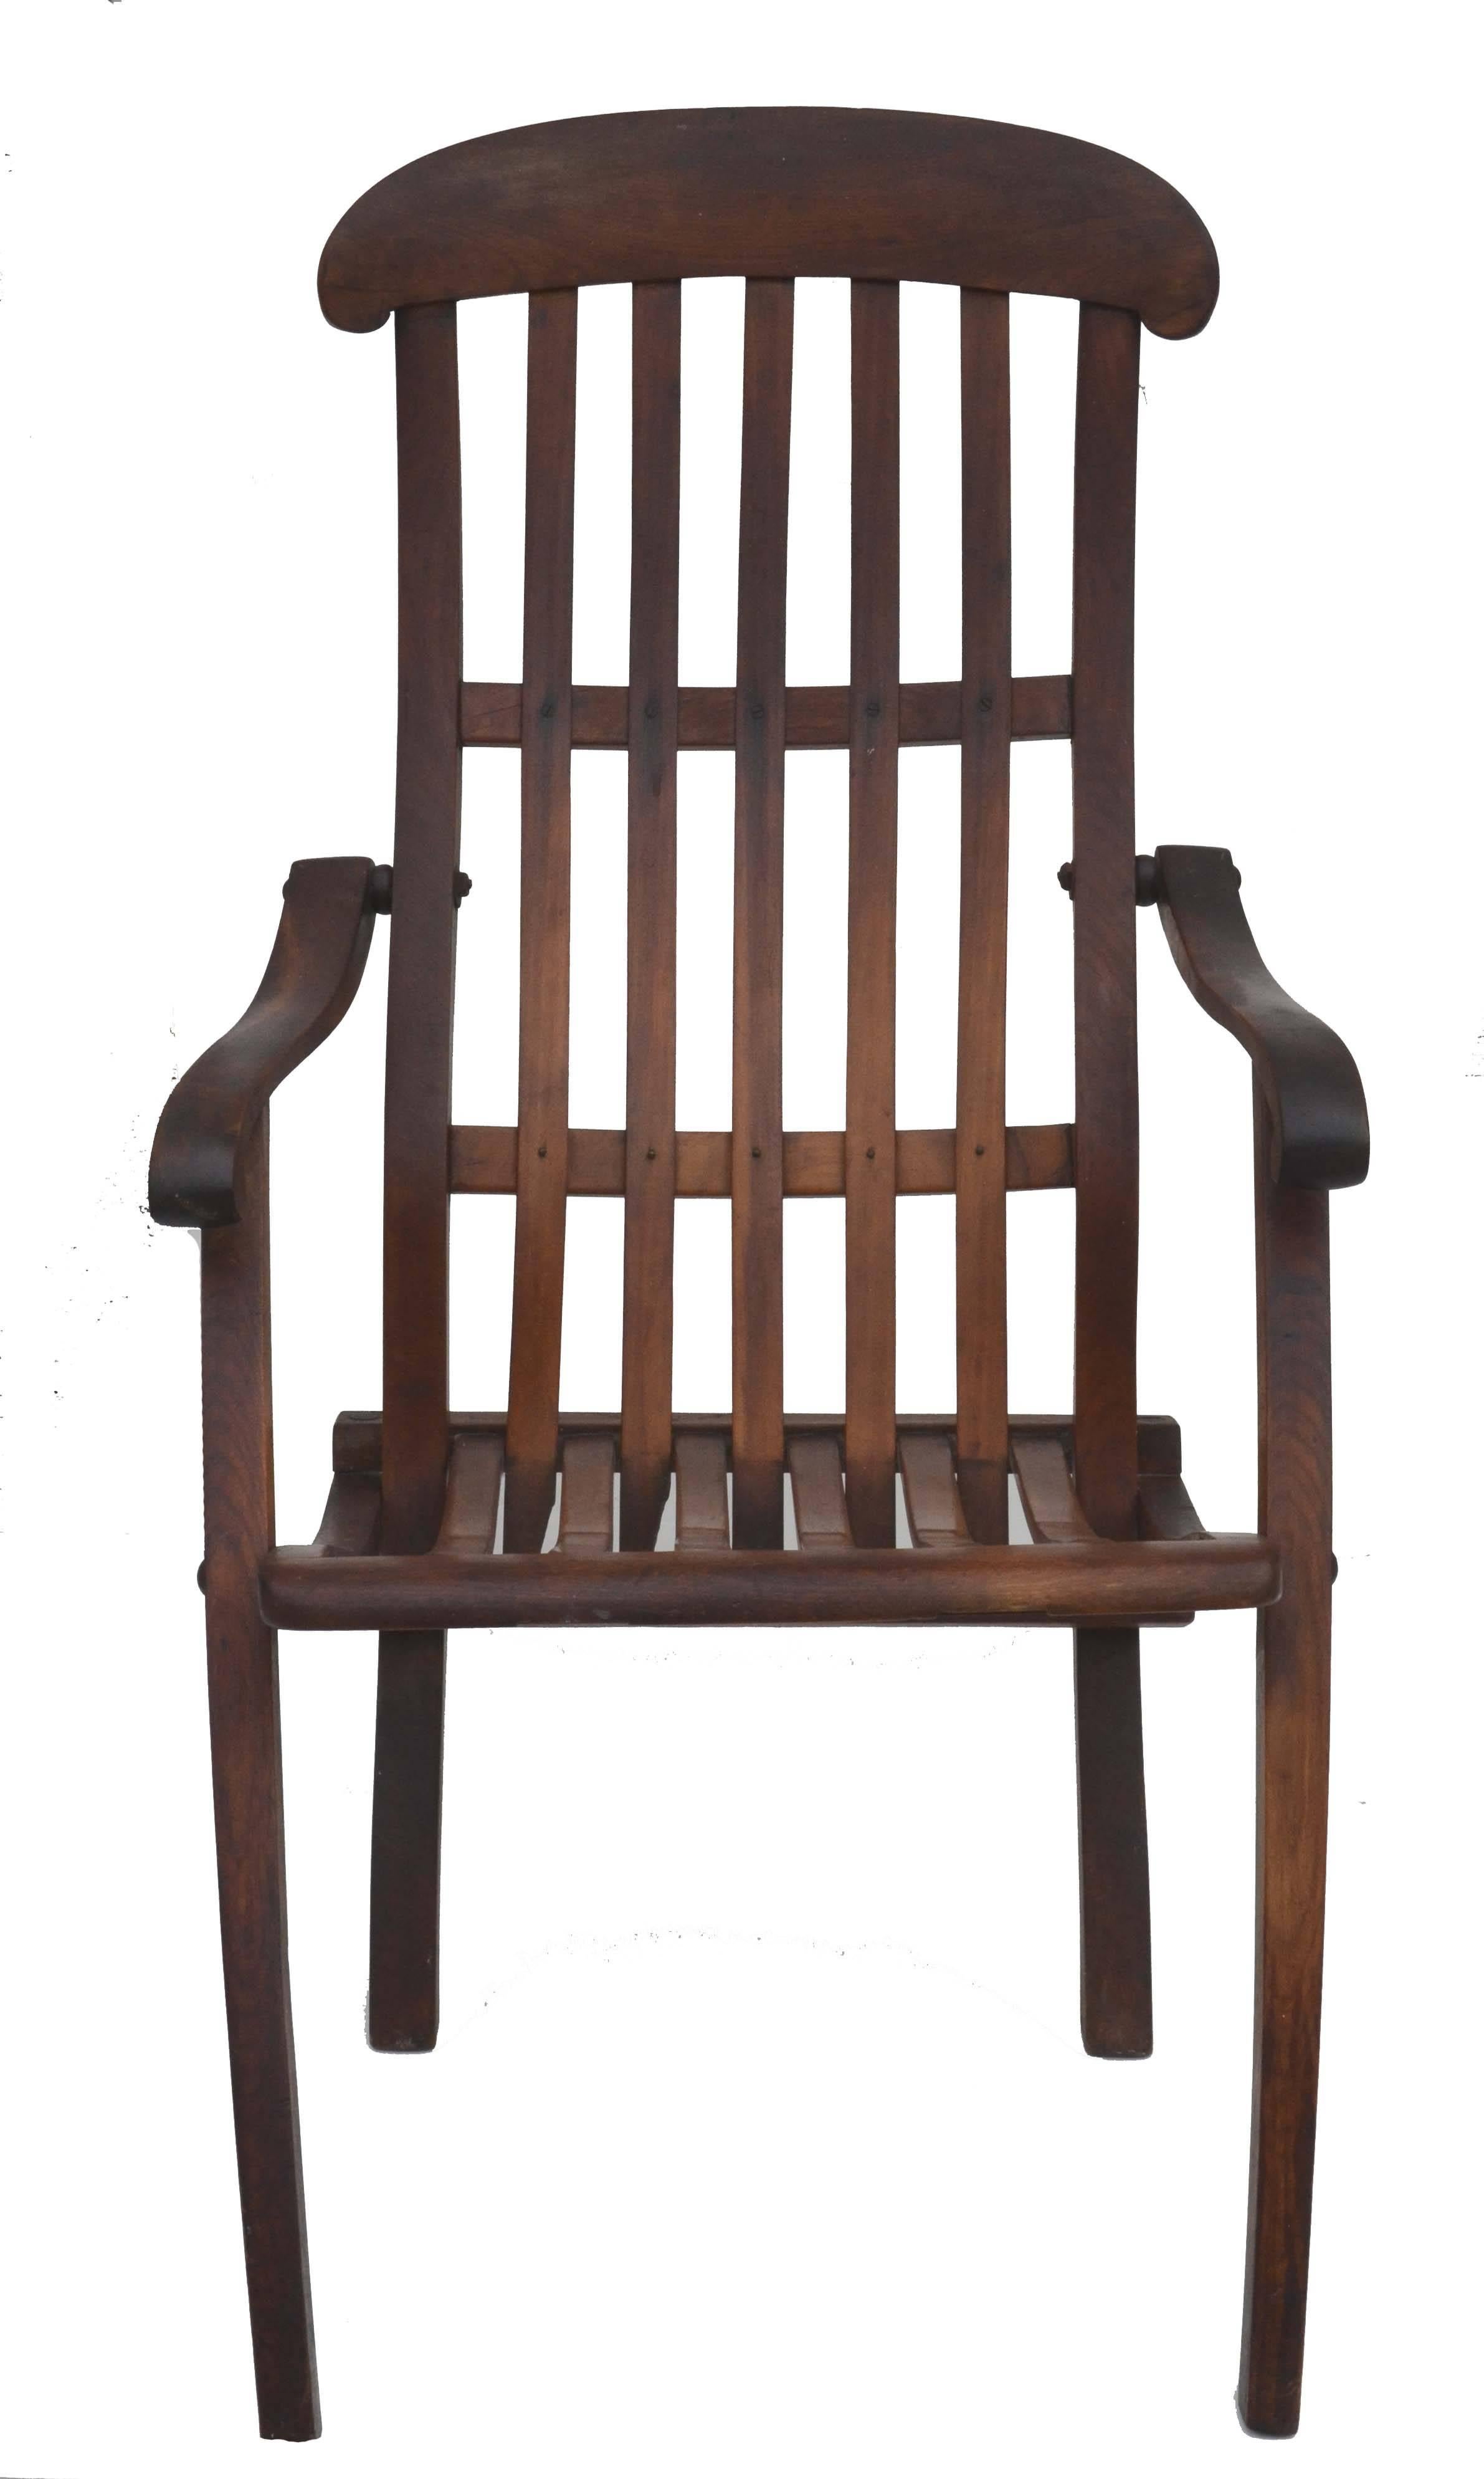 Wonderful dark teak antique folding deck lounge chair. Original hardware and finish. Very comfortable and cushion not necessary. circa 1900. Condition and wear consistent with age. folds for storage and convenience. Size 38" H x 38" W.